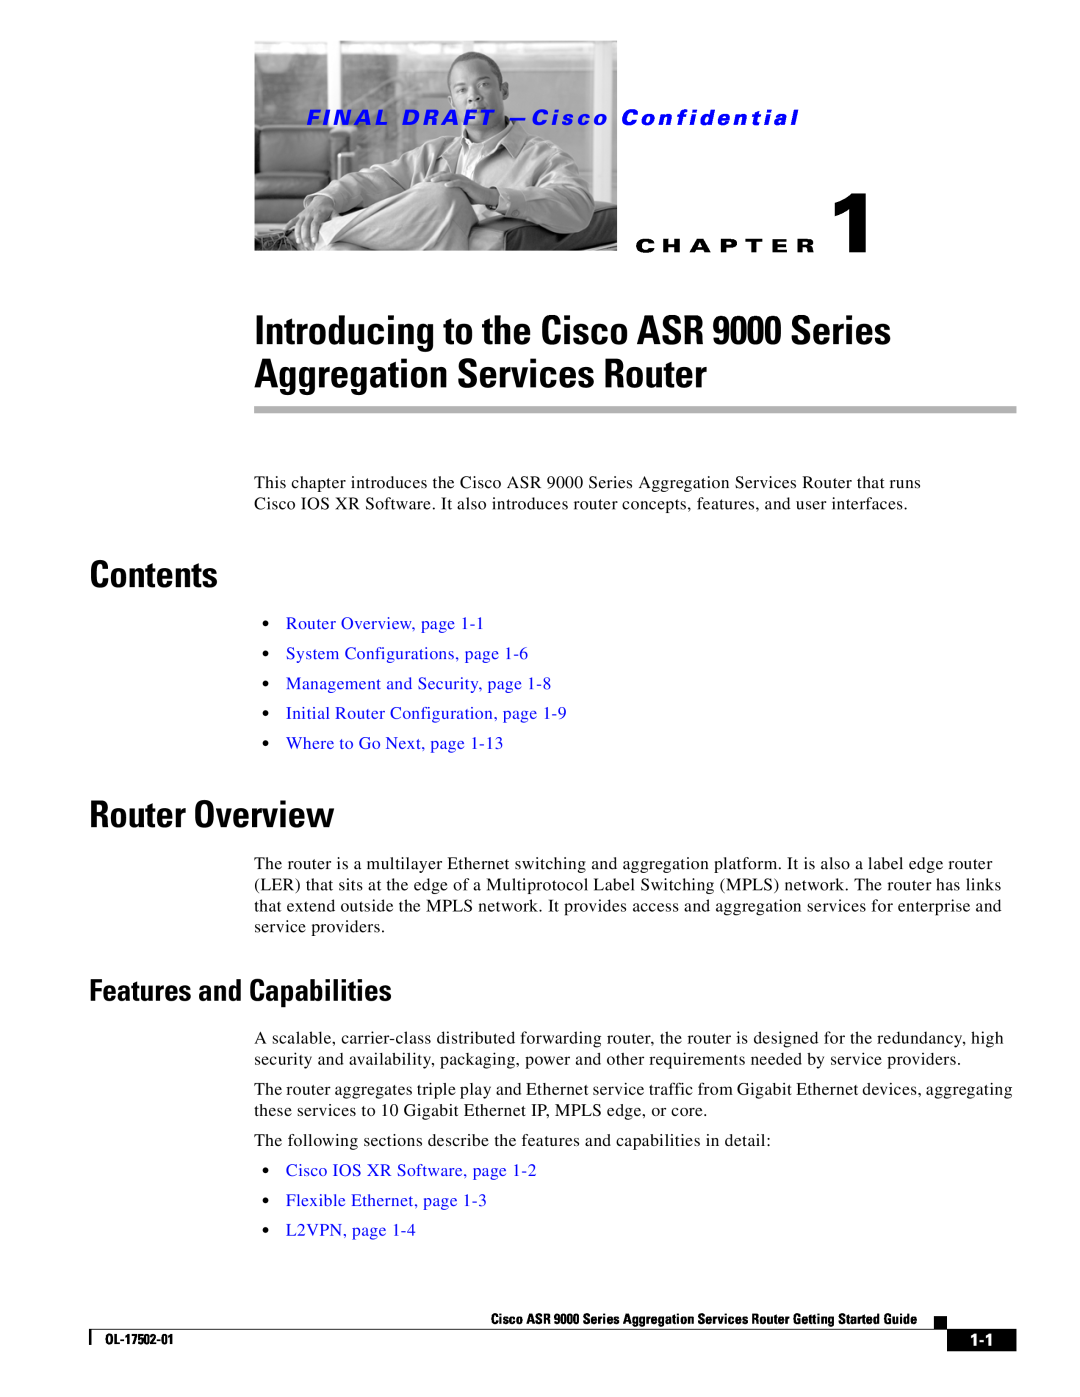 Cisco Systems manual Introducing to the Cisco ASR 9000 Series Aggregation Services Router, Contents, Router Overview 